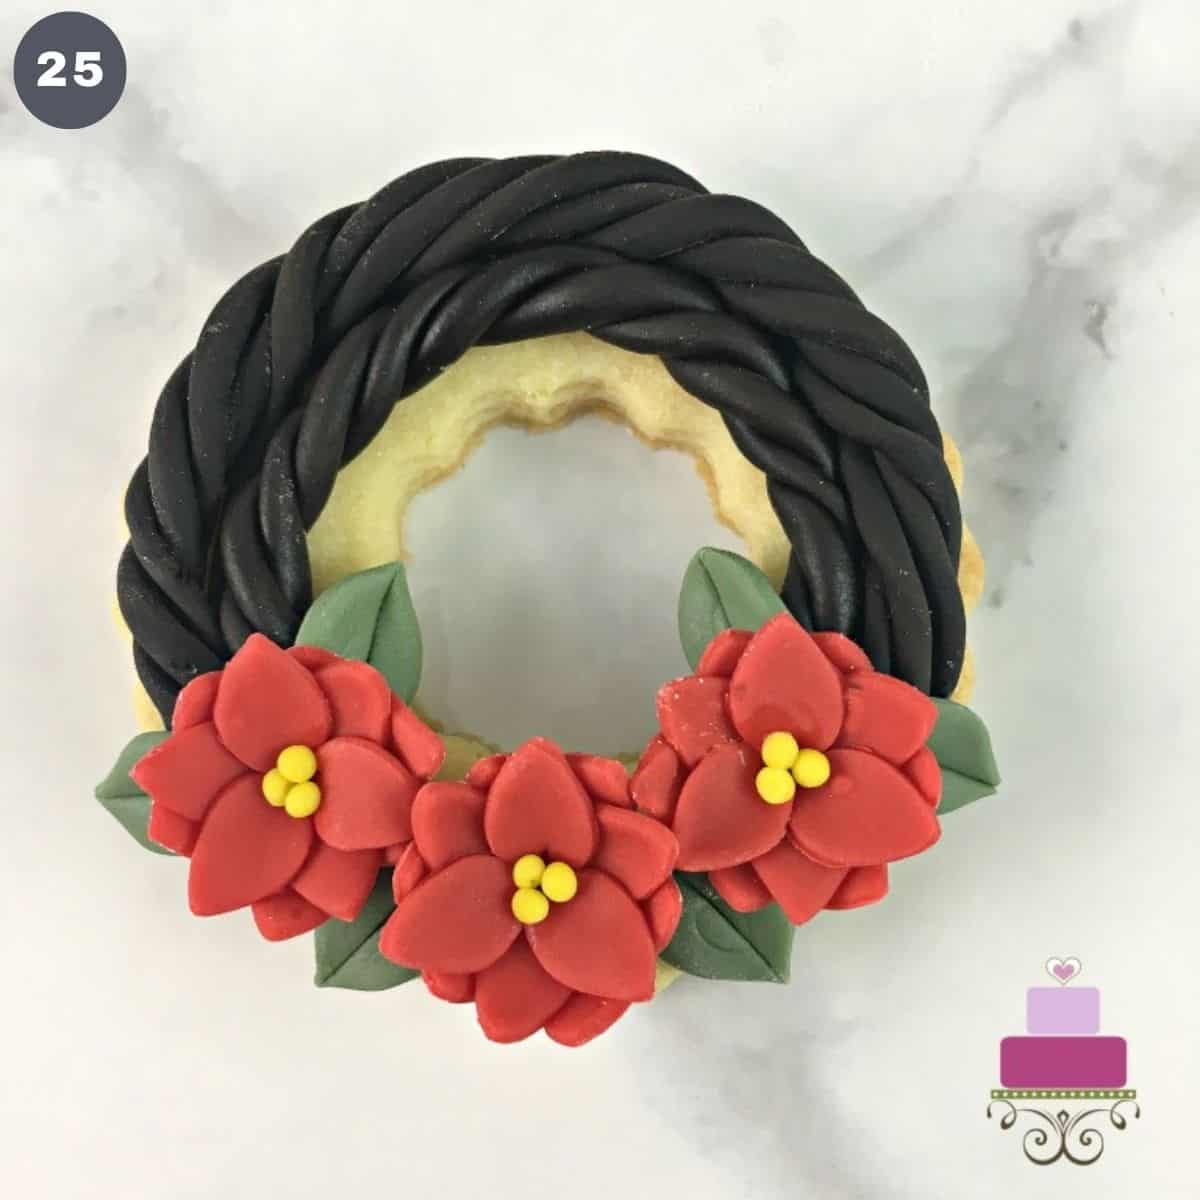 A ring shaped cookie decorated into a wreath with poinsettia flowers.